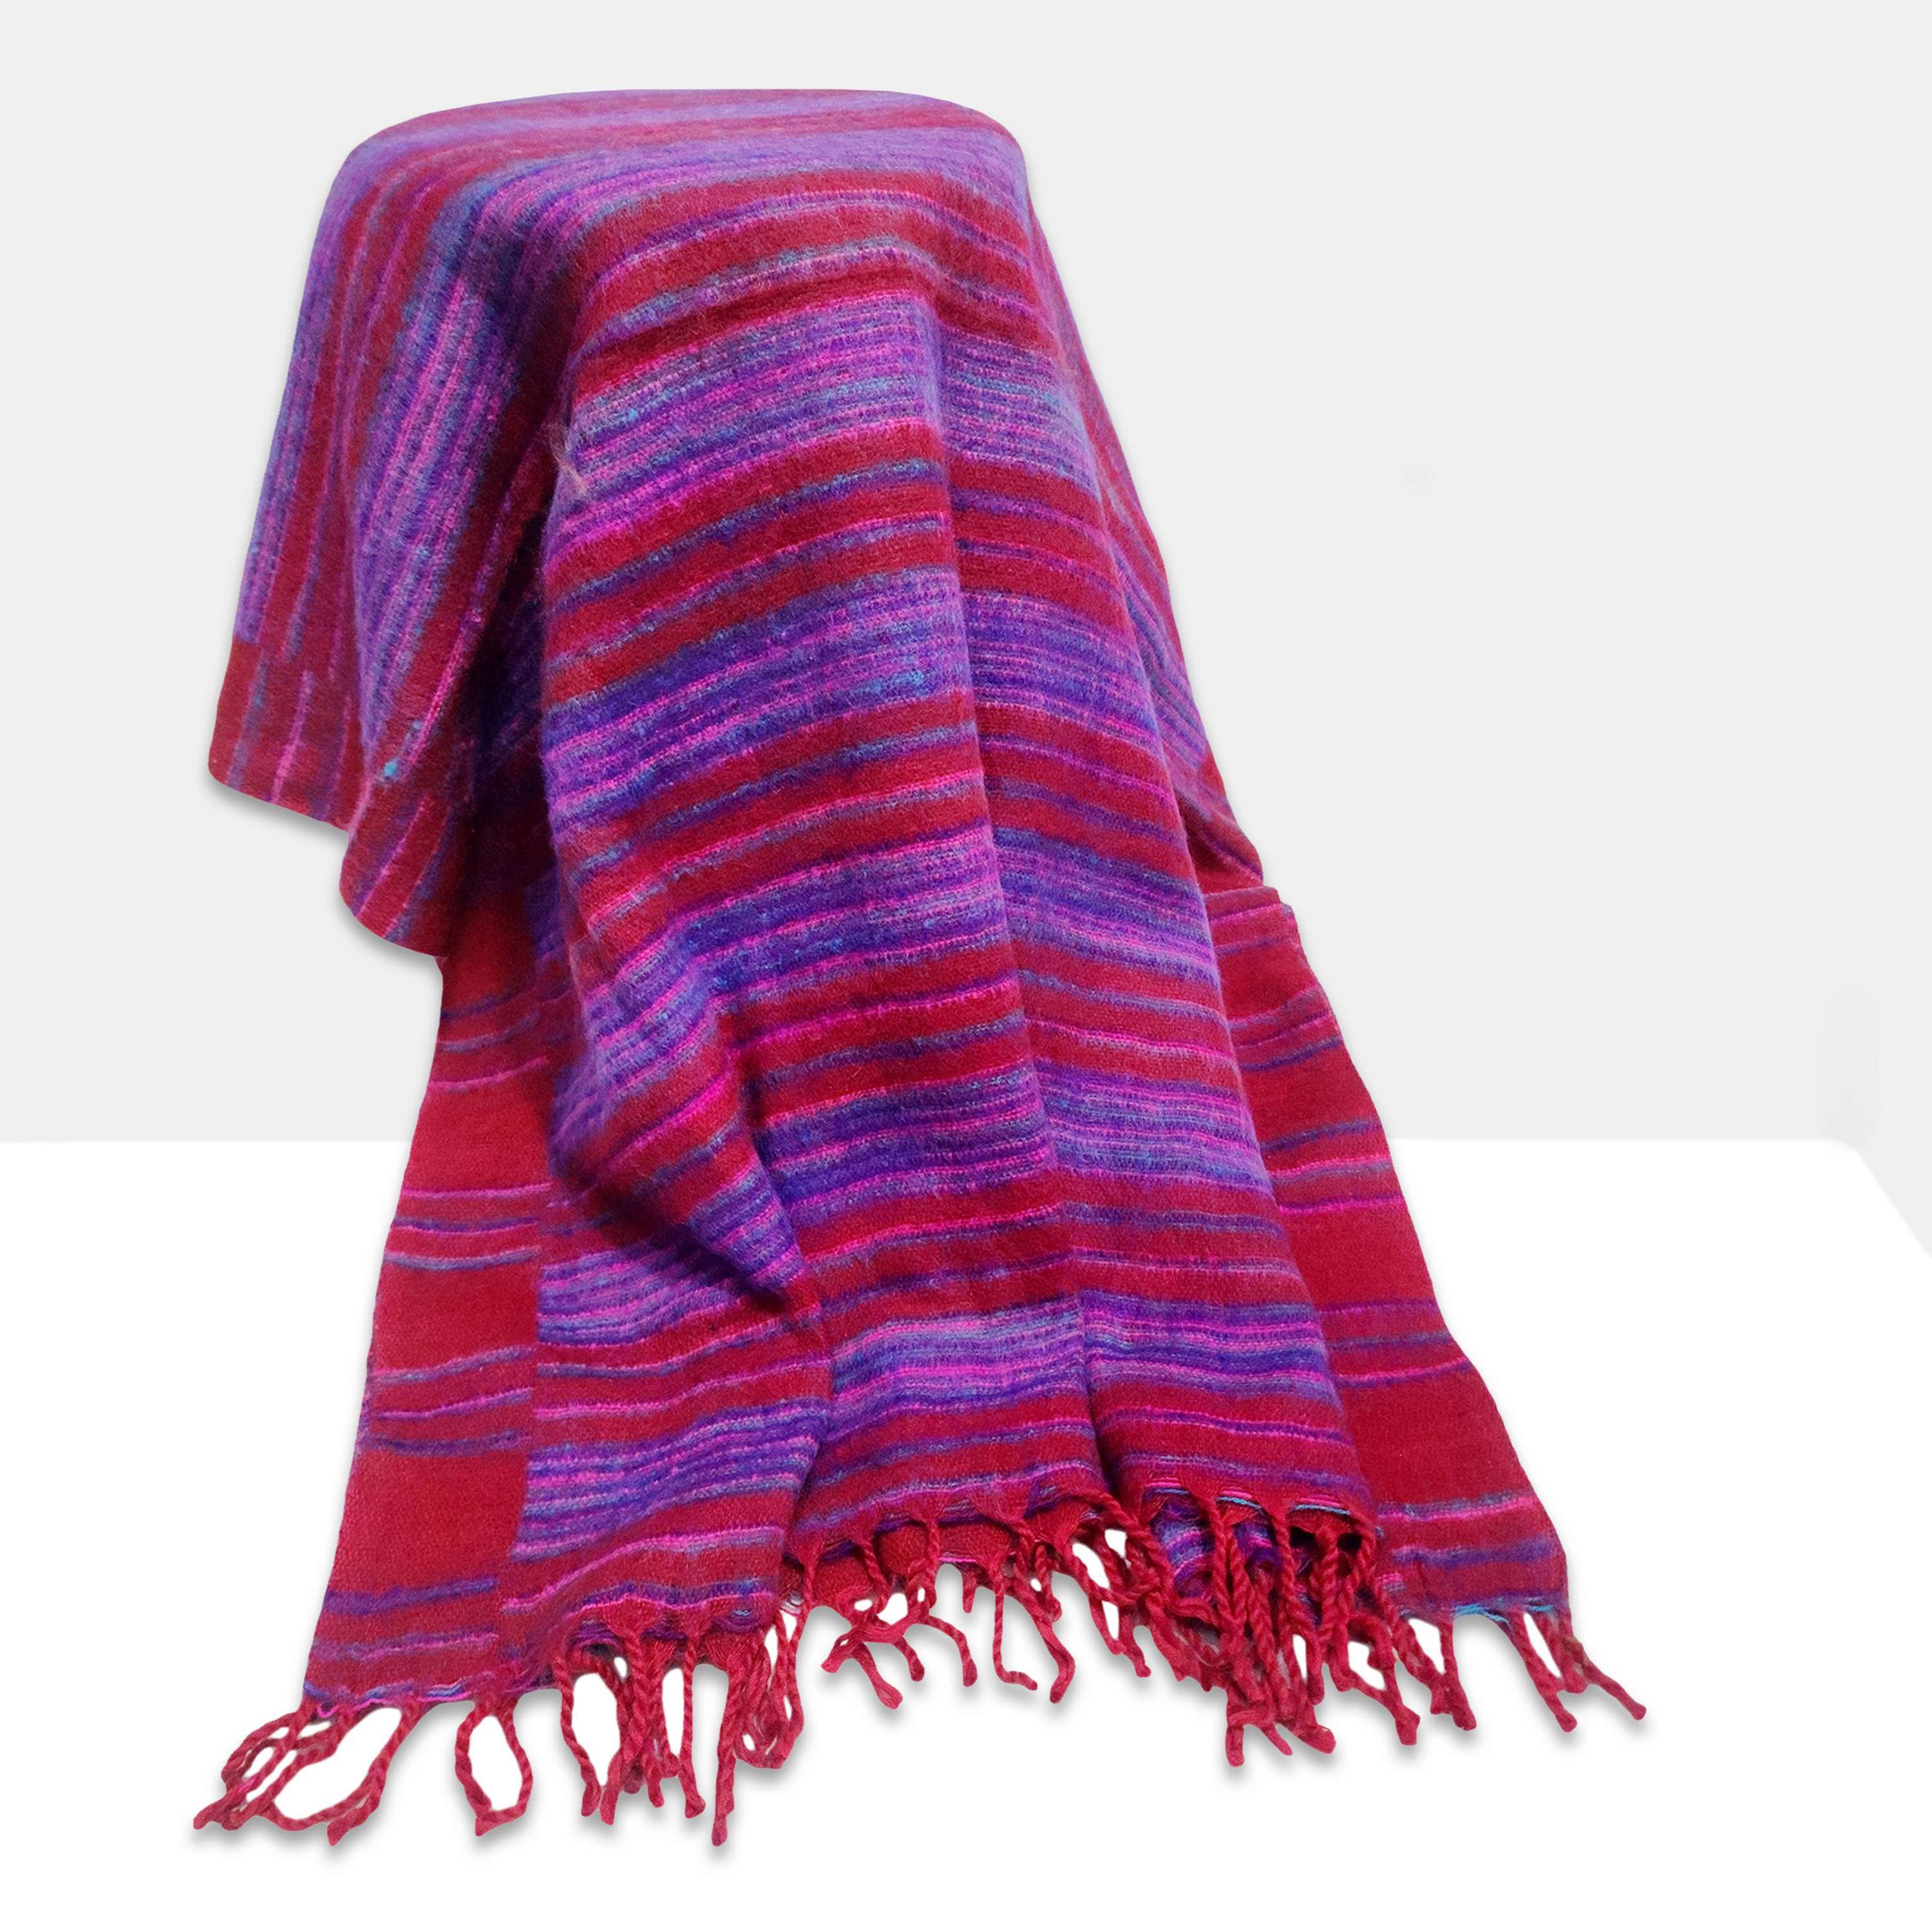 Tibet Shawl, Colorful And Warm: Acrylic Woolen Shawls For Any Occasion In Carmine Color And Stripes